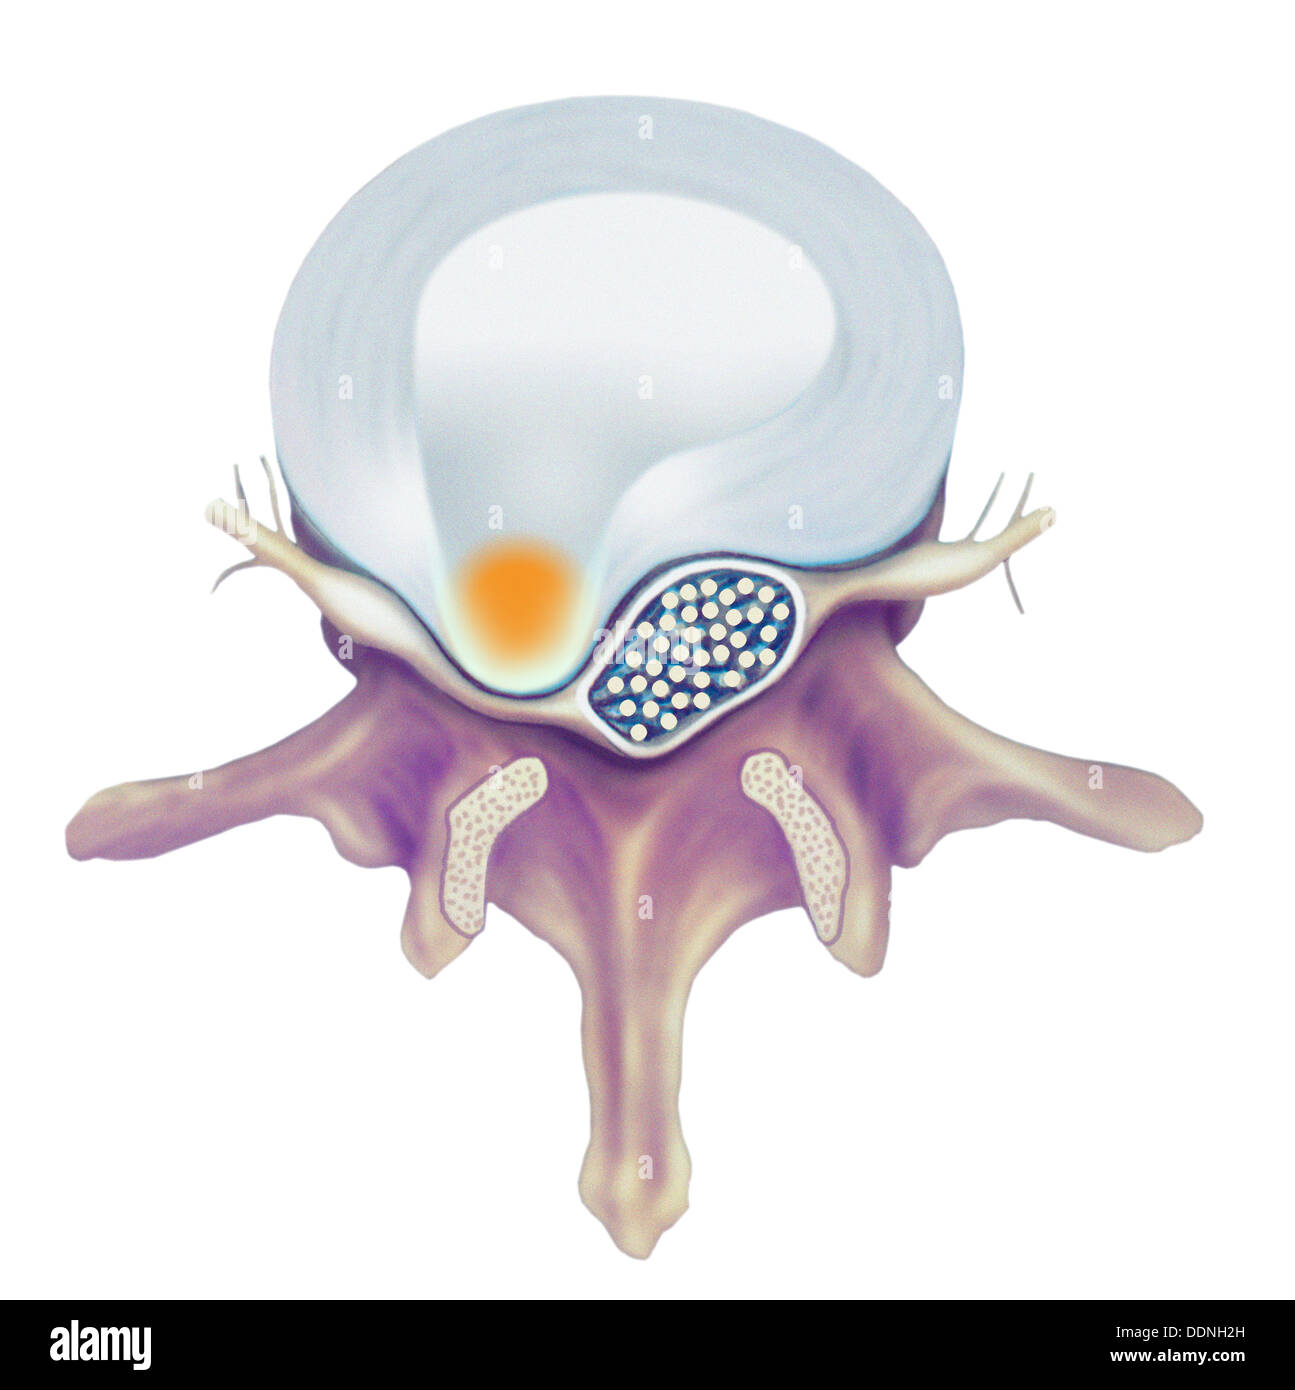 Spinal disc herniation Stock Photo